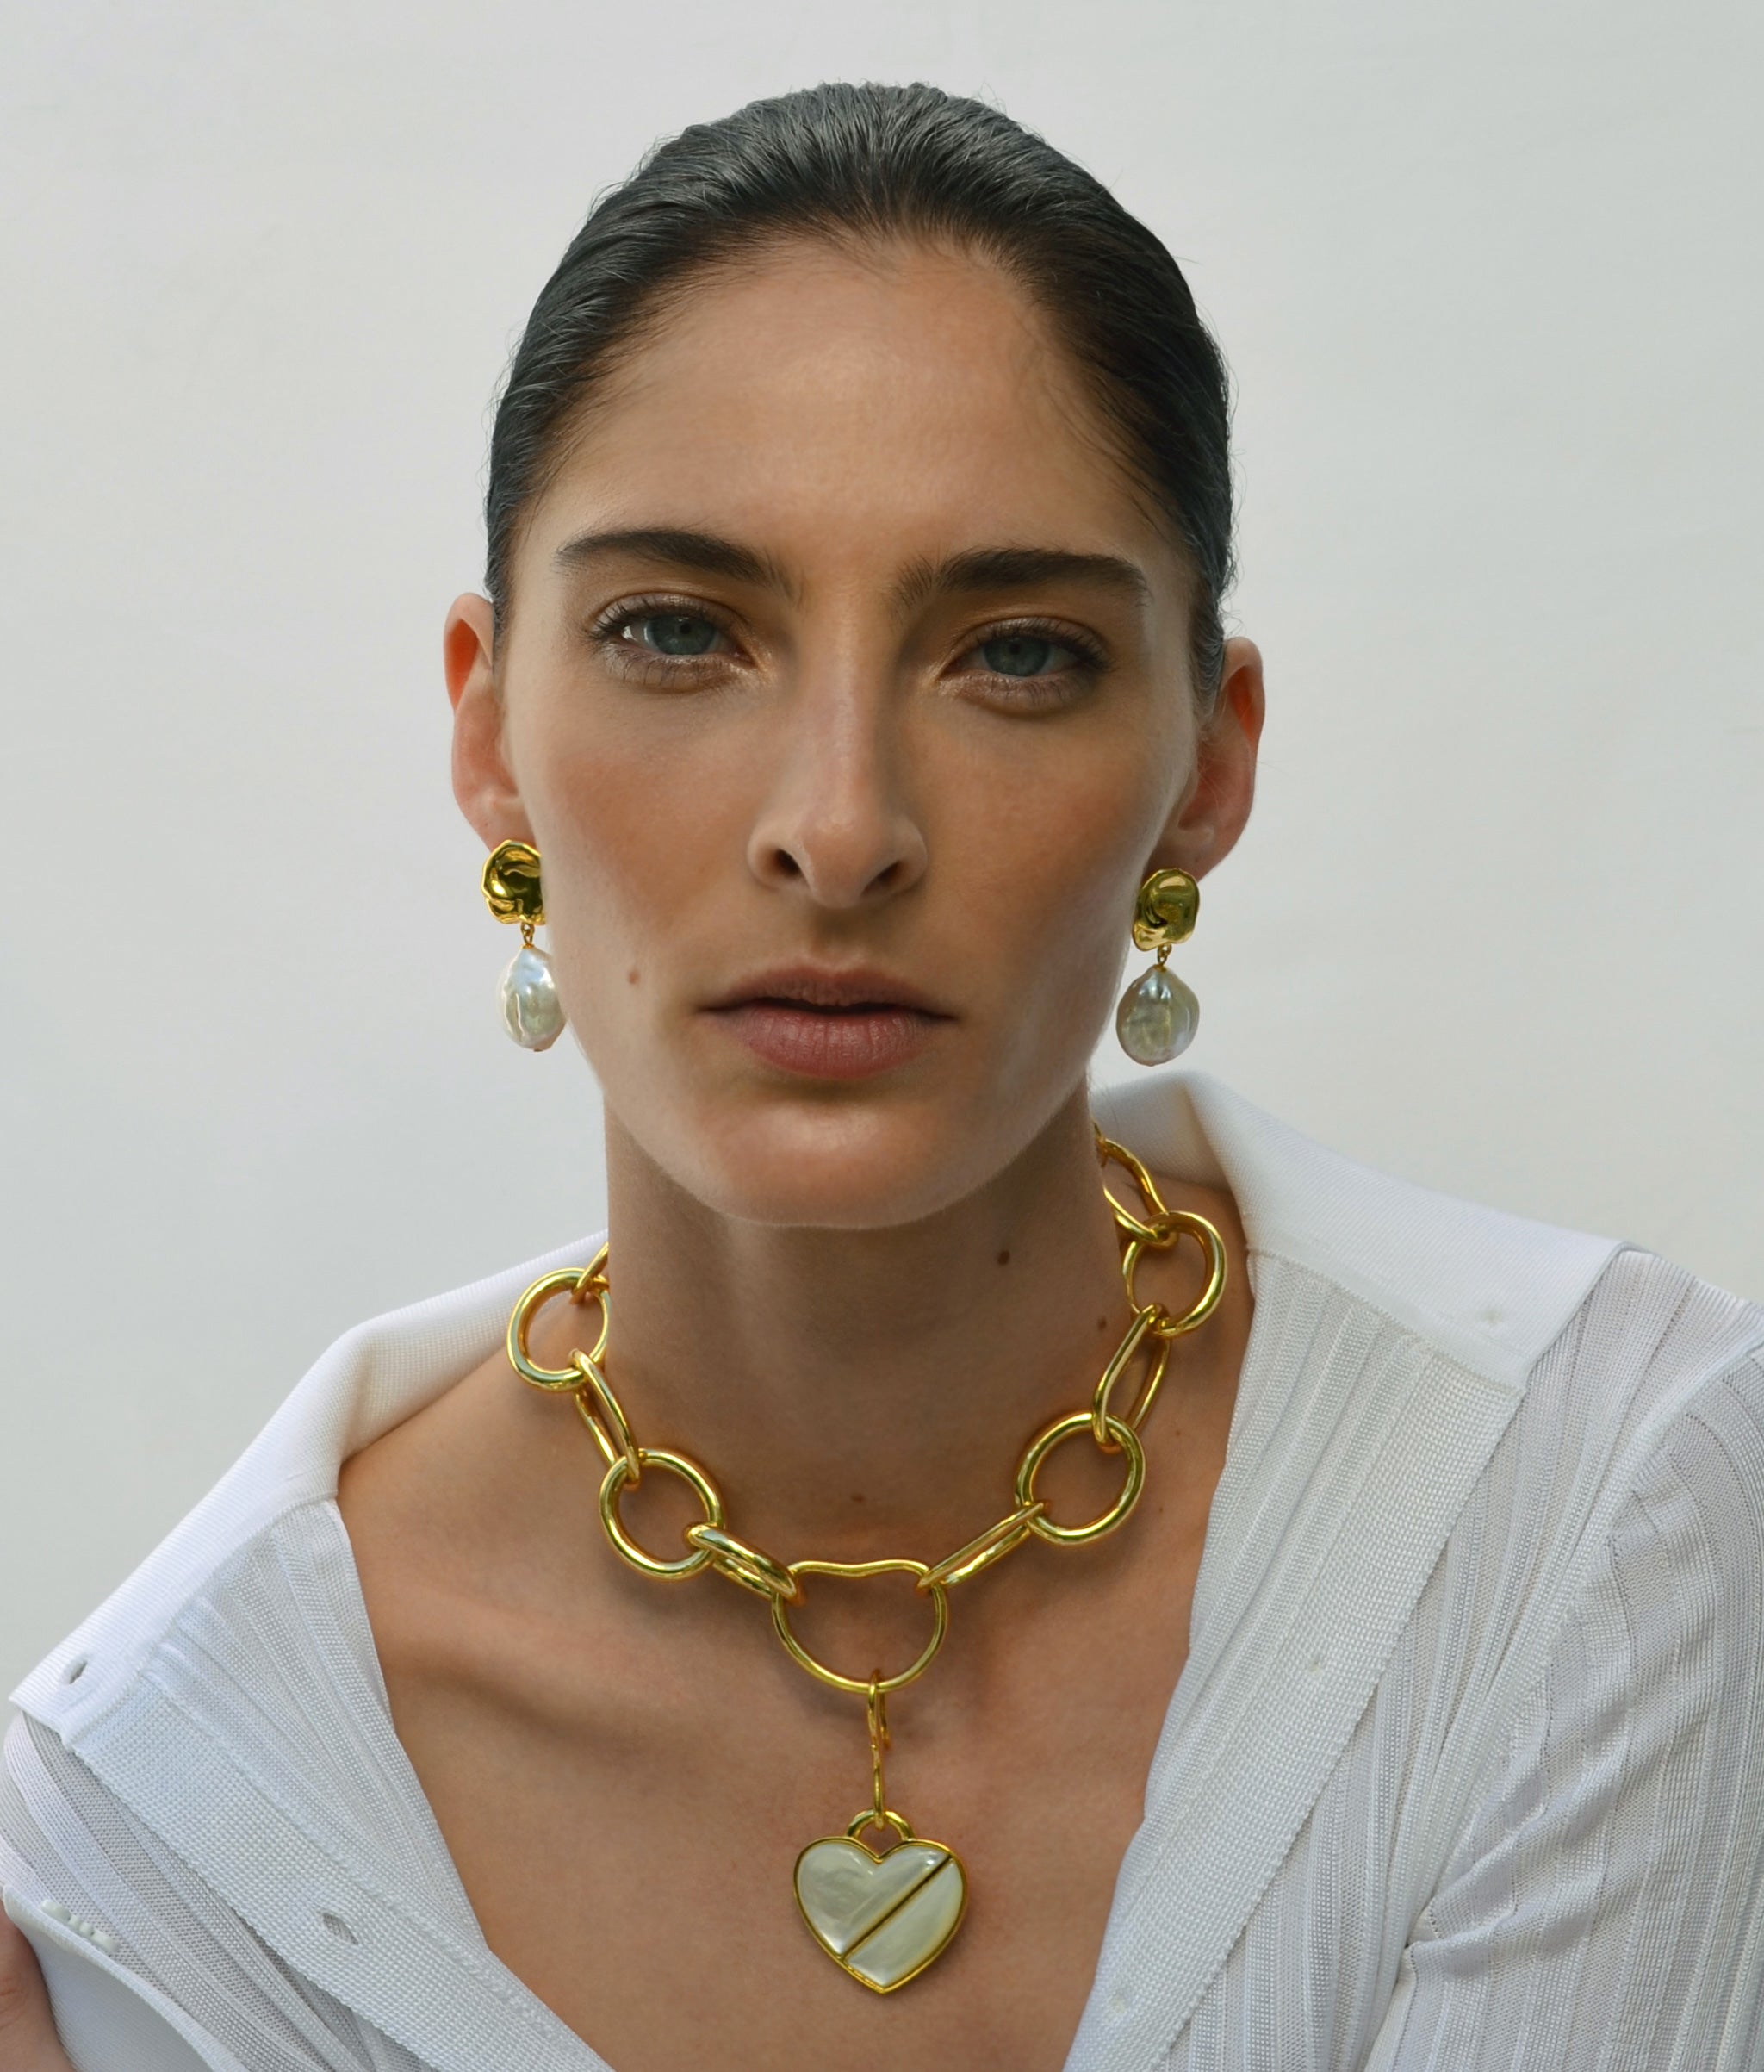 Model on grey backdrop wears white blouse with Porto Chain and heart charm and Coin Reflection Earrings